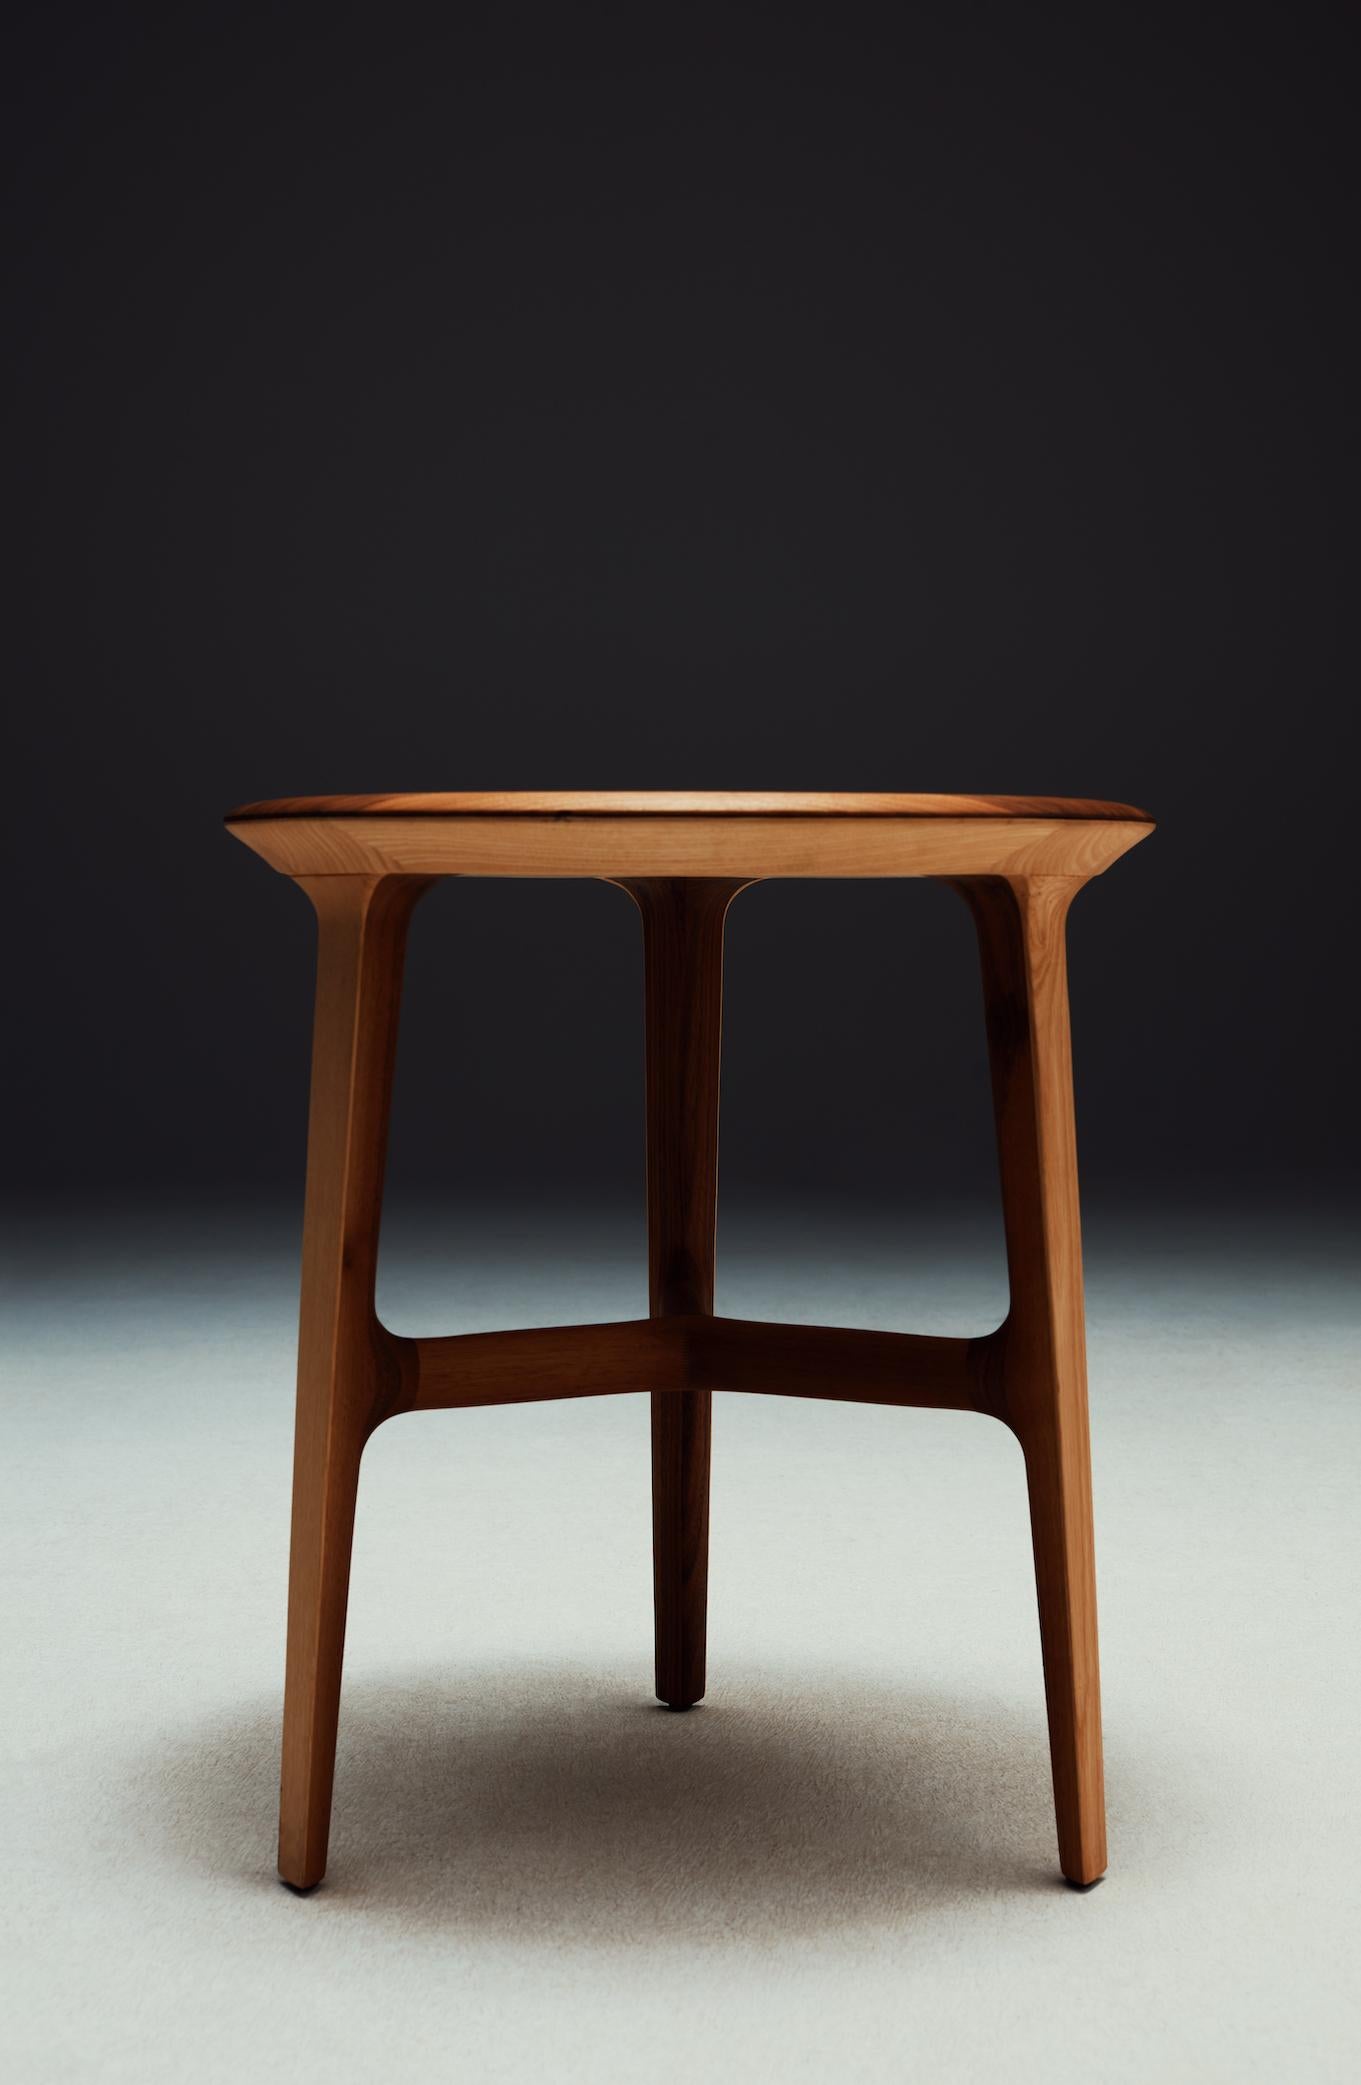 La Manufacture-Paris Yakisugi Solid Wood Table by Noé Duchaufour-Lawrance In New Condition For Sale In New York, NY